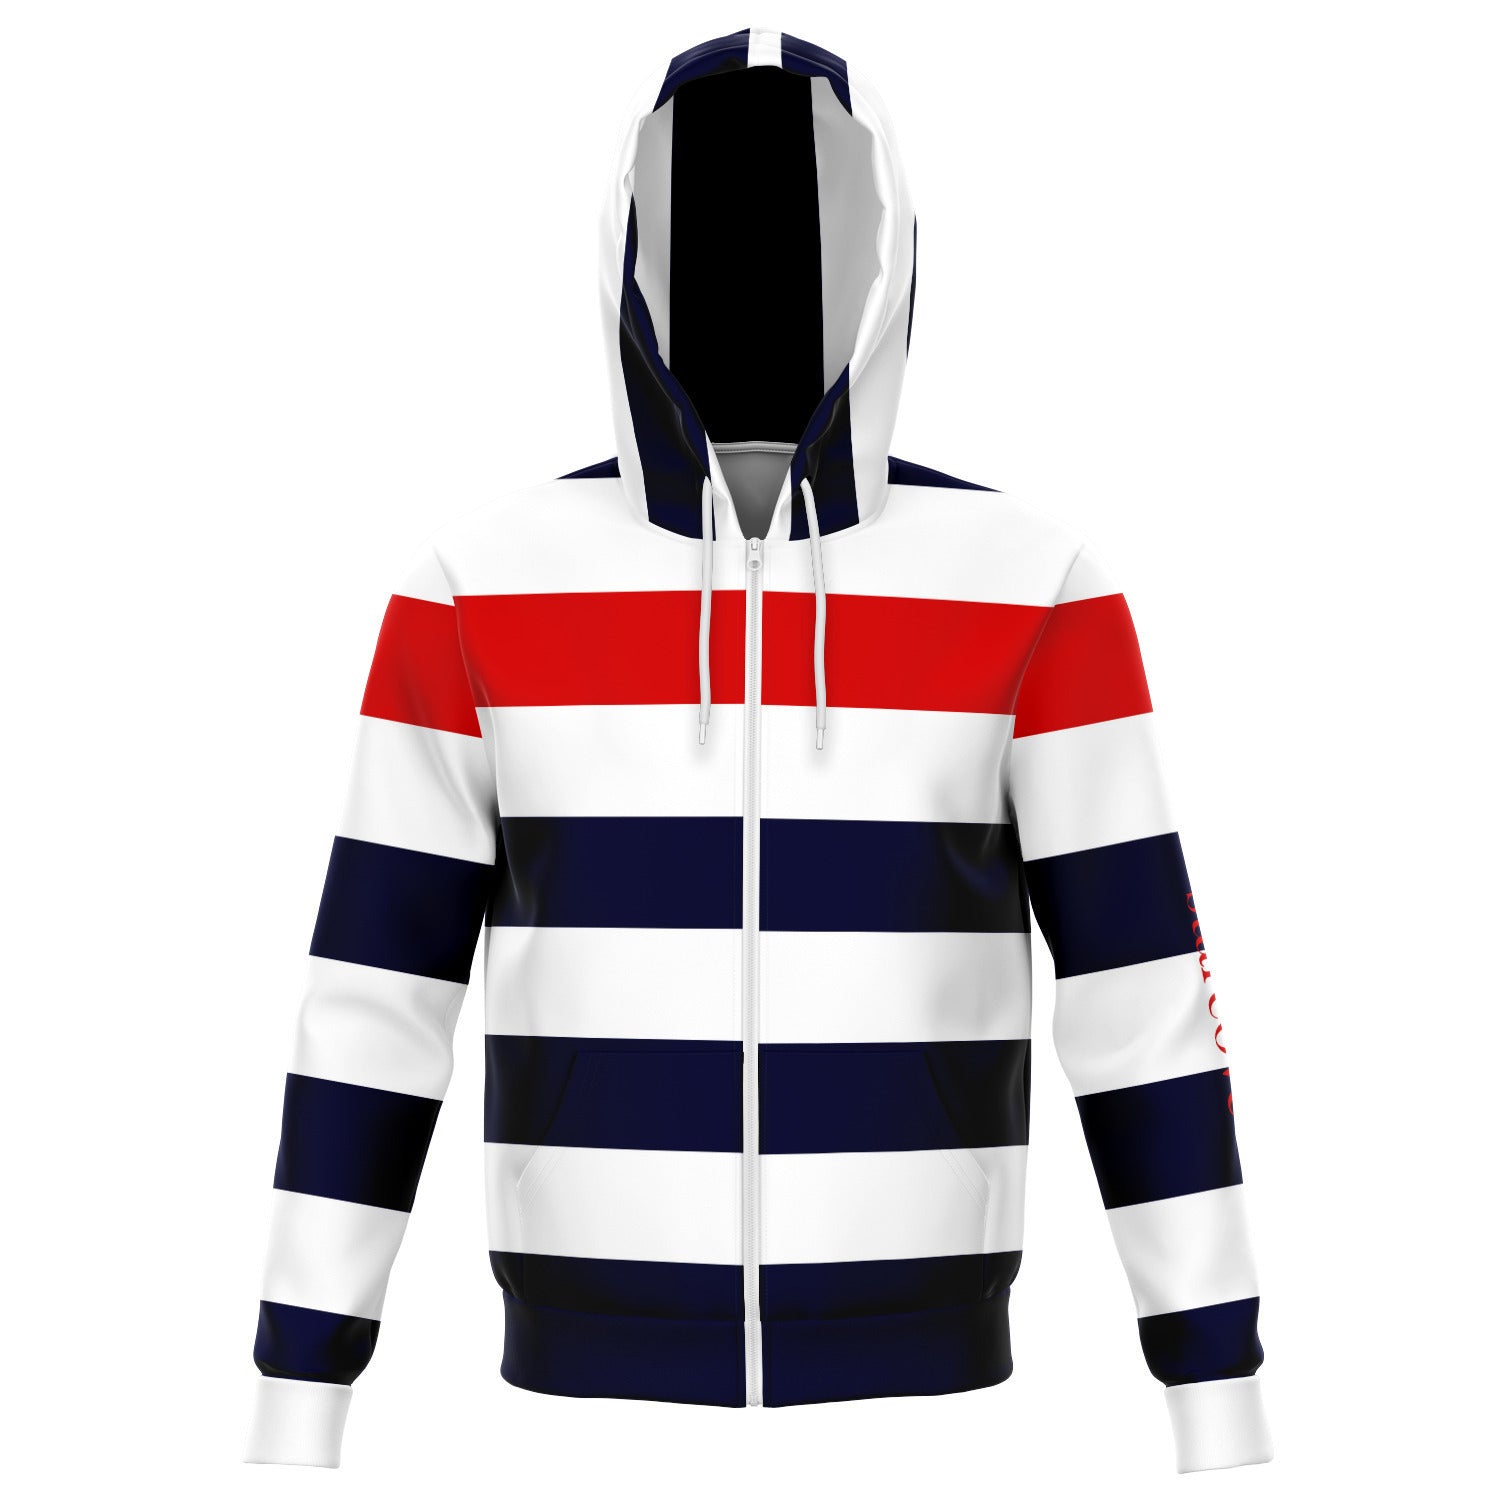 Starcove Red Blue White Stripes Zip Up Hoodie, Striped Front Zipper Pocket Men Women Unisex Adult Aesthetic Graphic Cotton Hooded Sweatshirt Xs